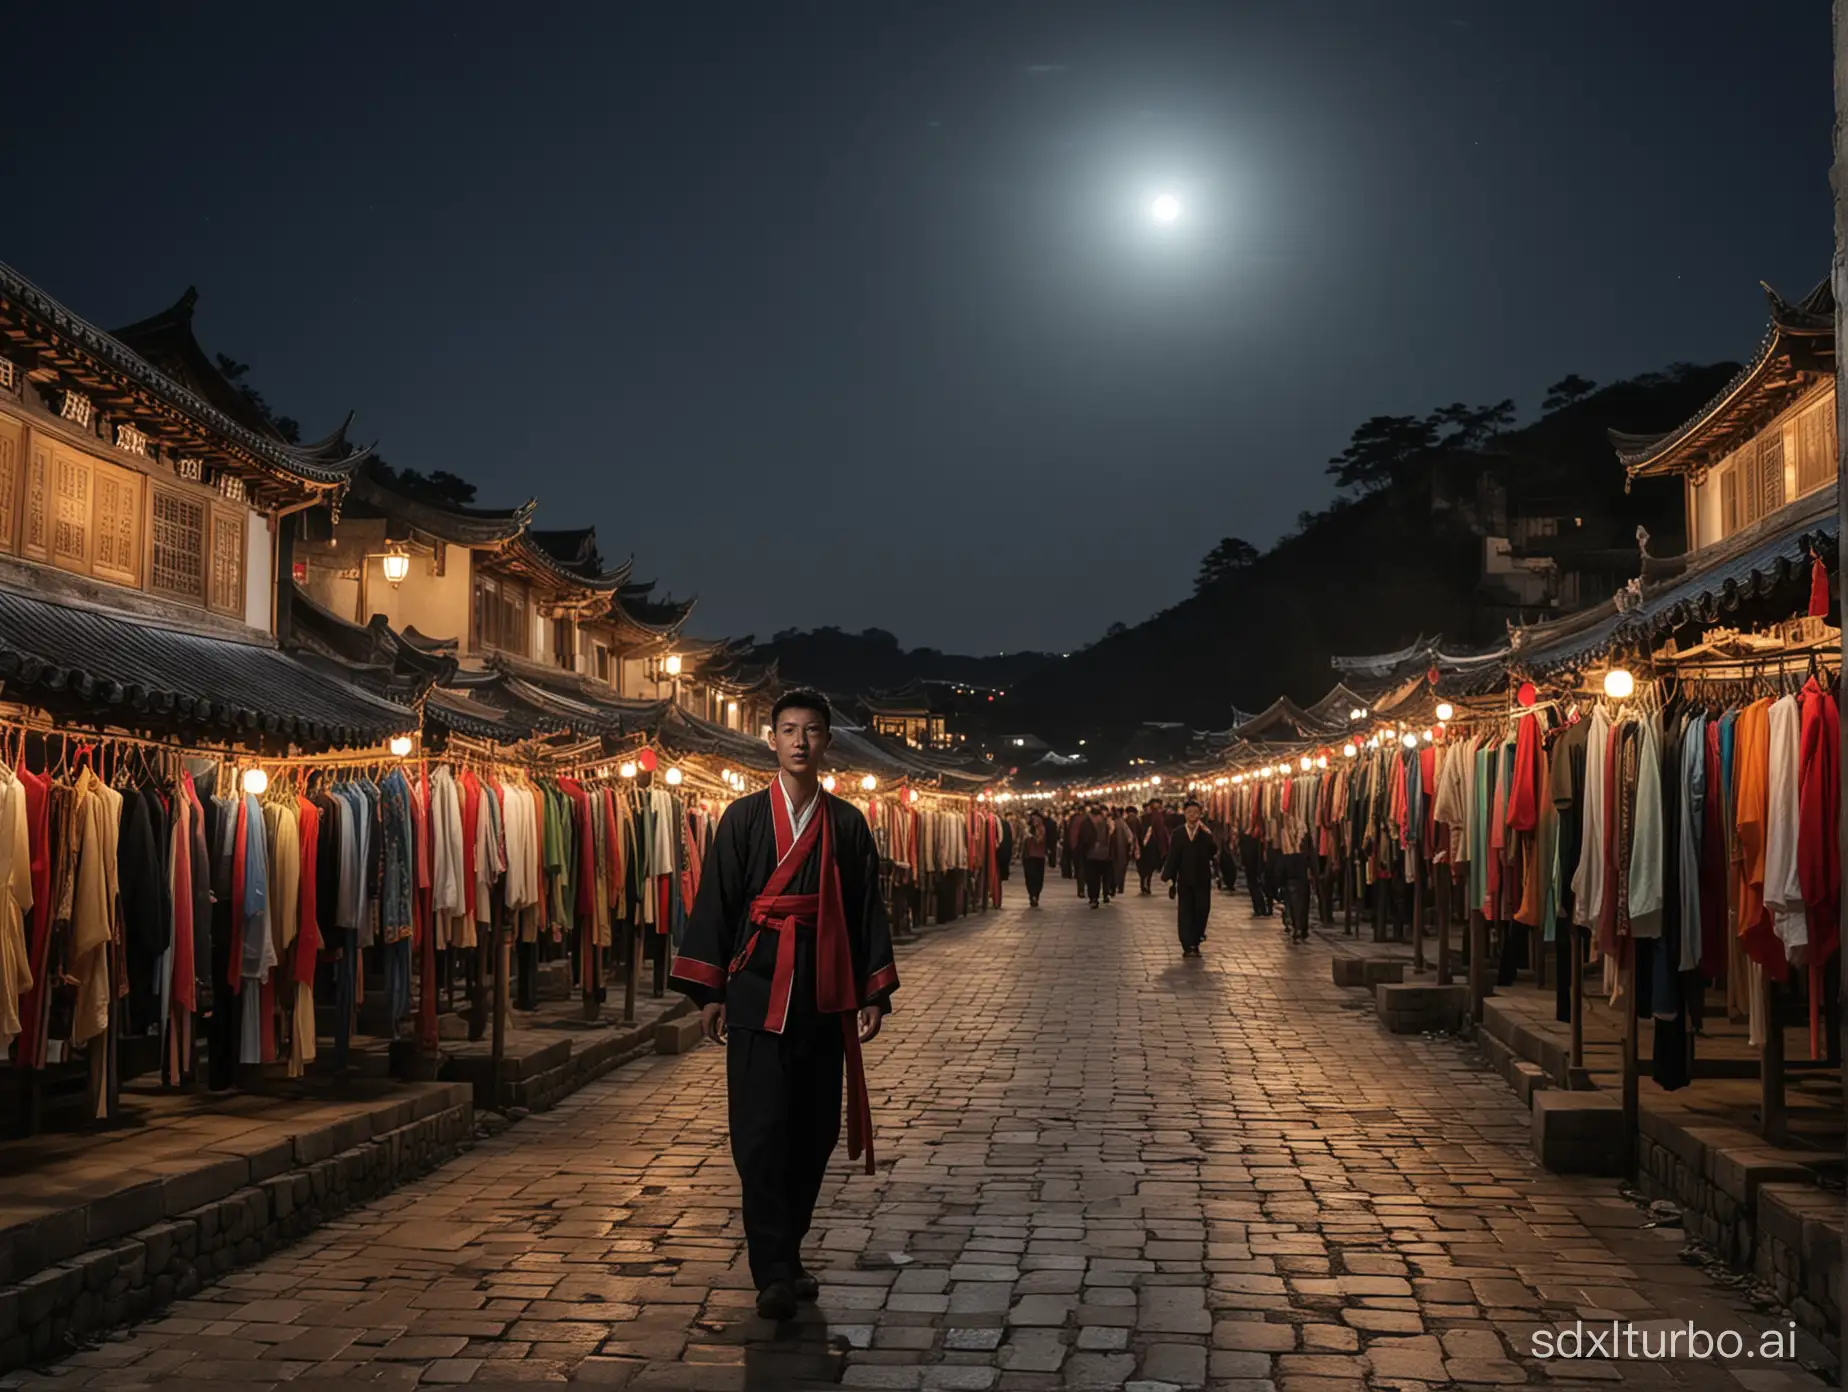 Moonlight spills over the ancient town of Putian, tranquil. Li Yi, a young man returning from the city, received a mysterious invitation from a distant relative, inviting him to participate in the annual large-scale folk event in Putian Town—the Mazu Parade. Li Yi is somewhat curious about this event, but more curious about the relative who sent the invitation. They haven't been in contact for many years, so why suddenly invite him?